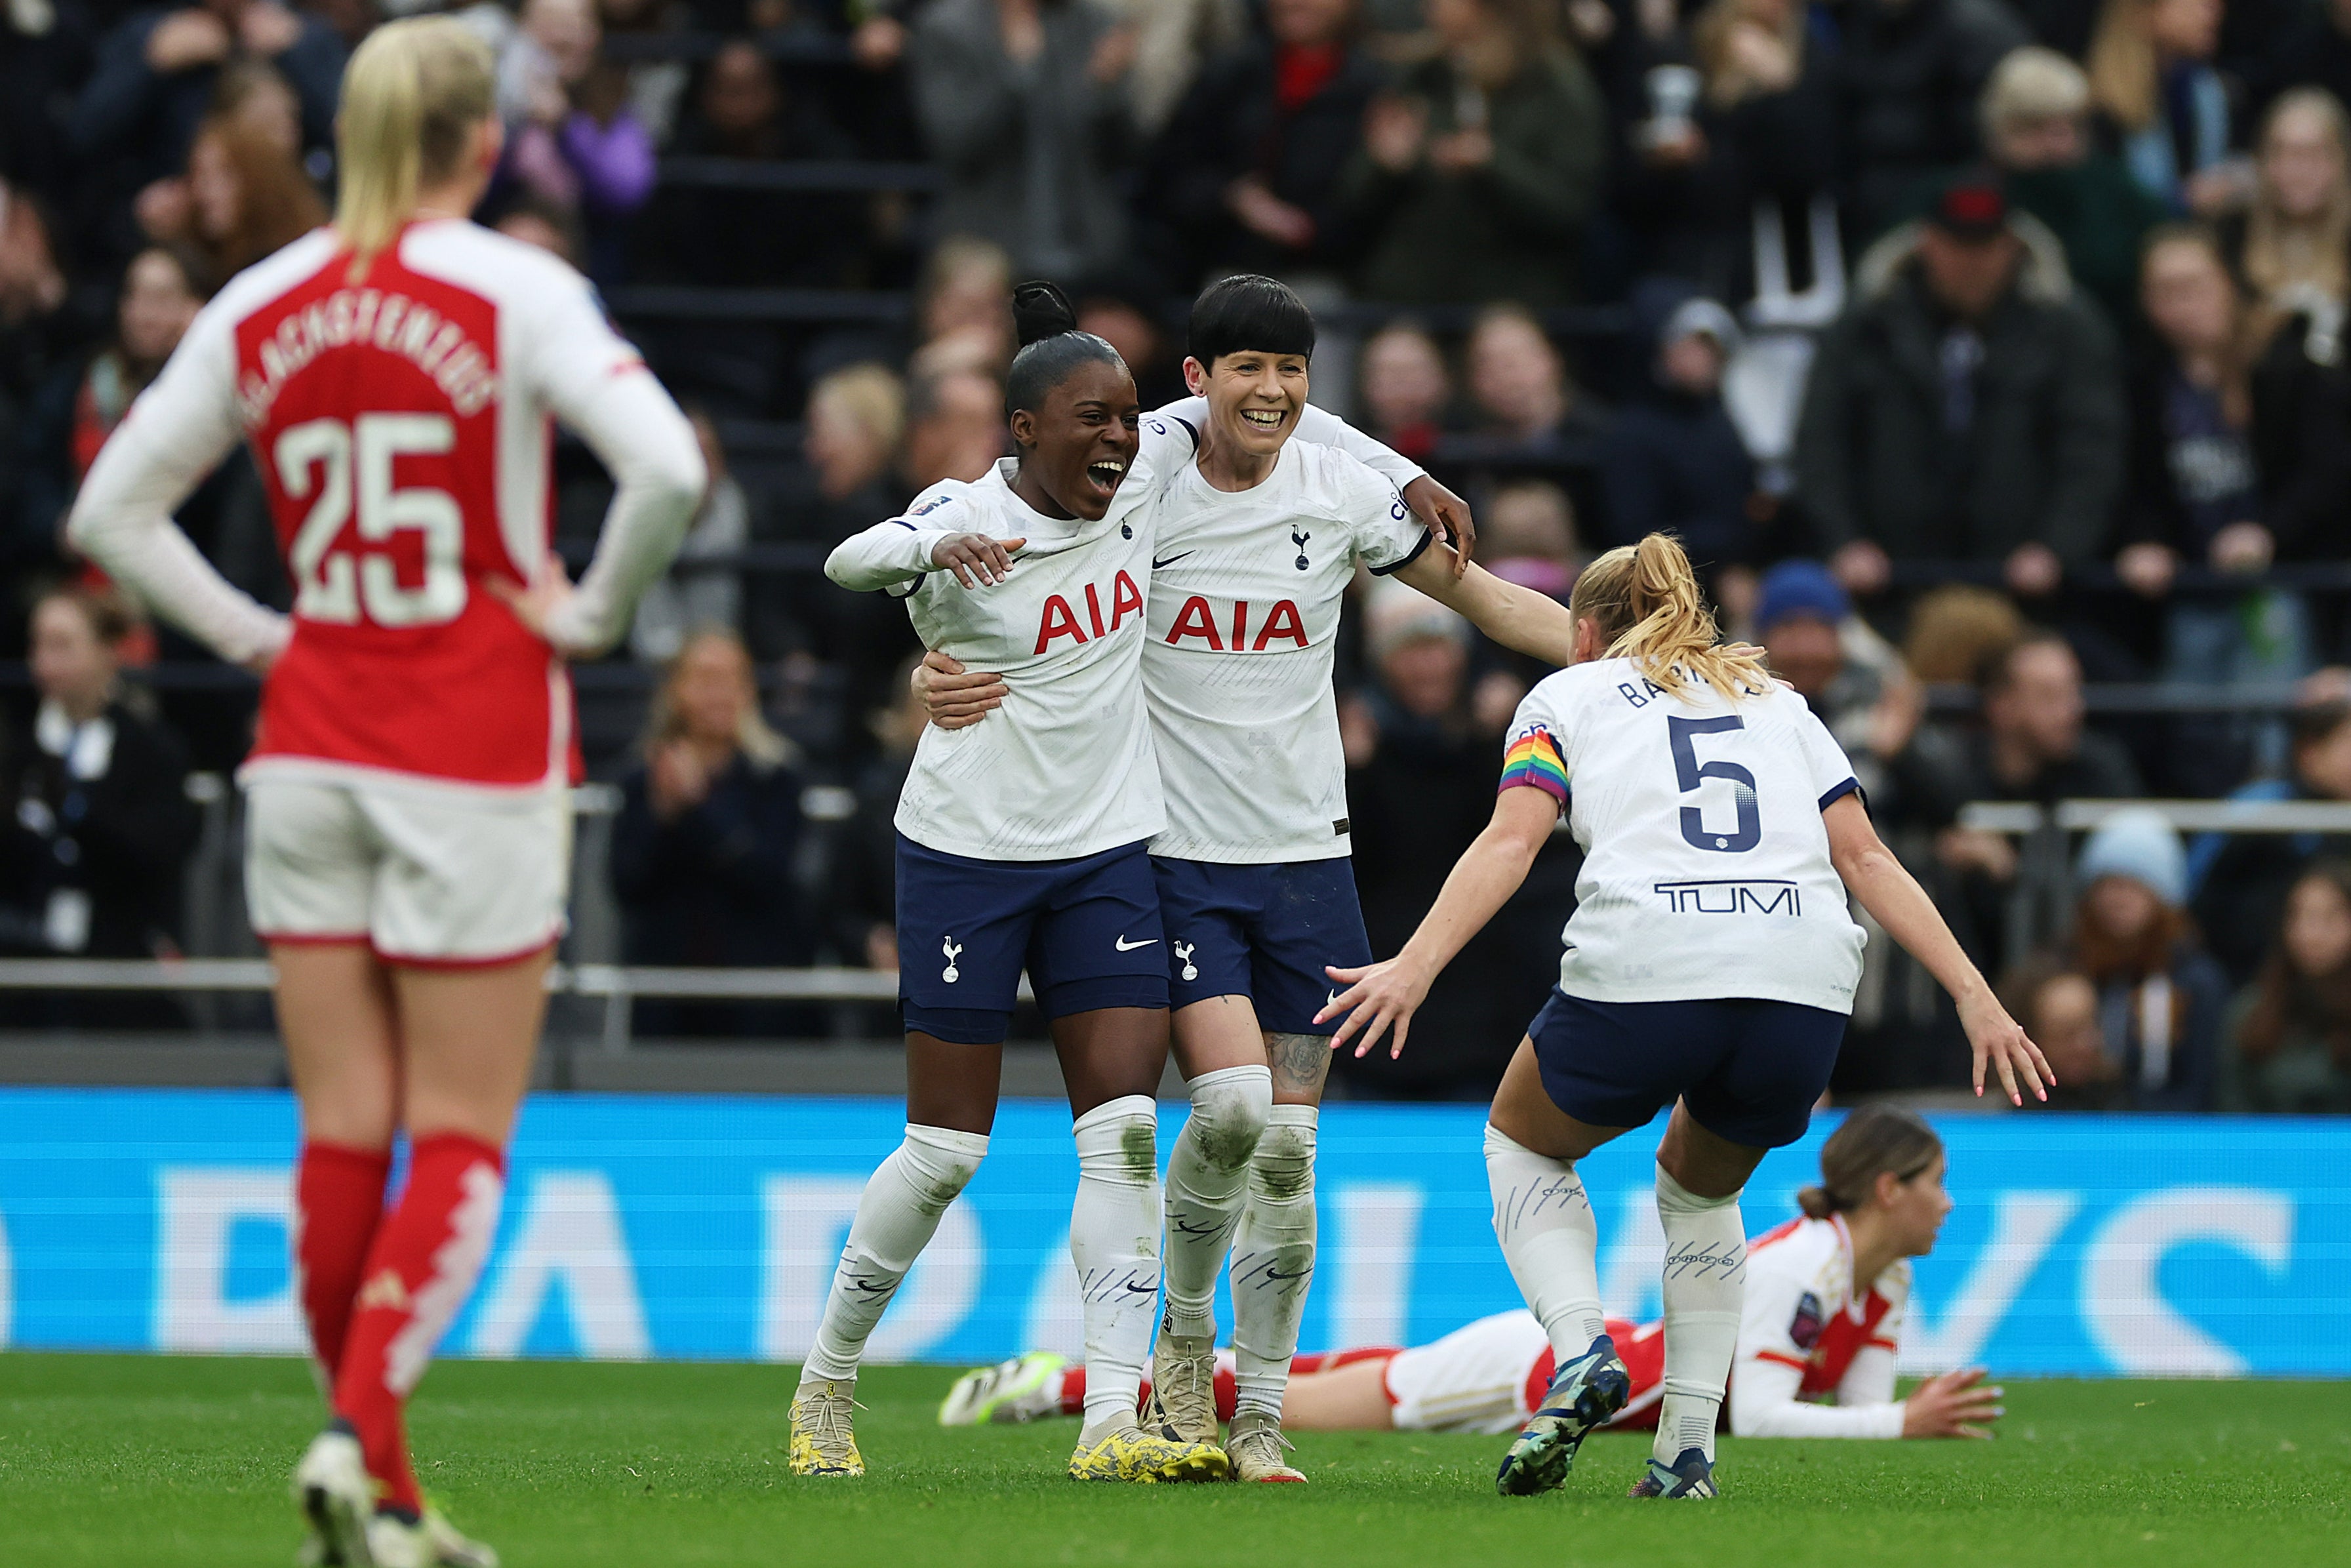 Spurs could celebrate a first-ever WSL win over Arsenal